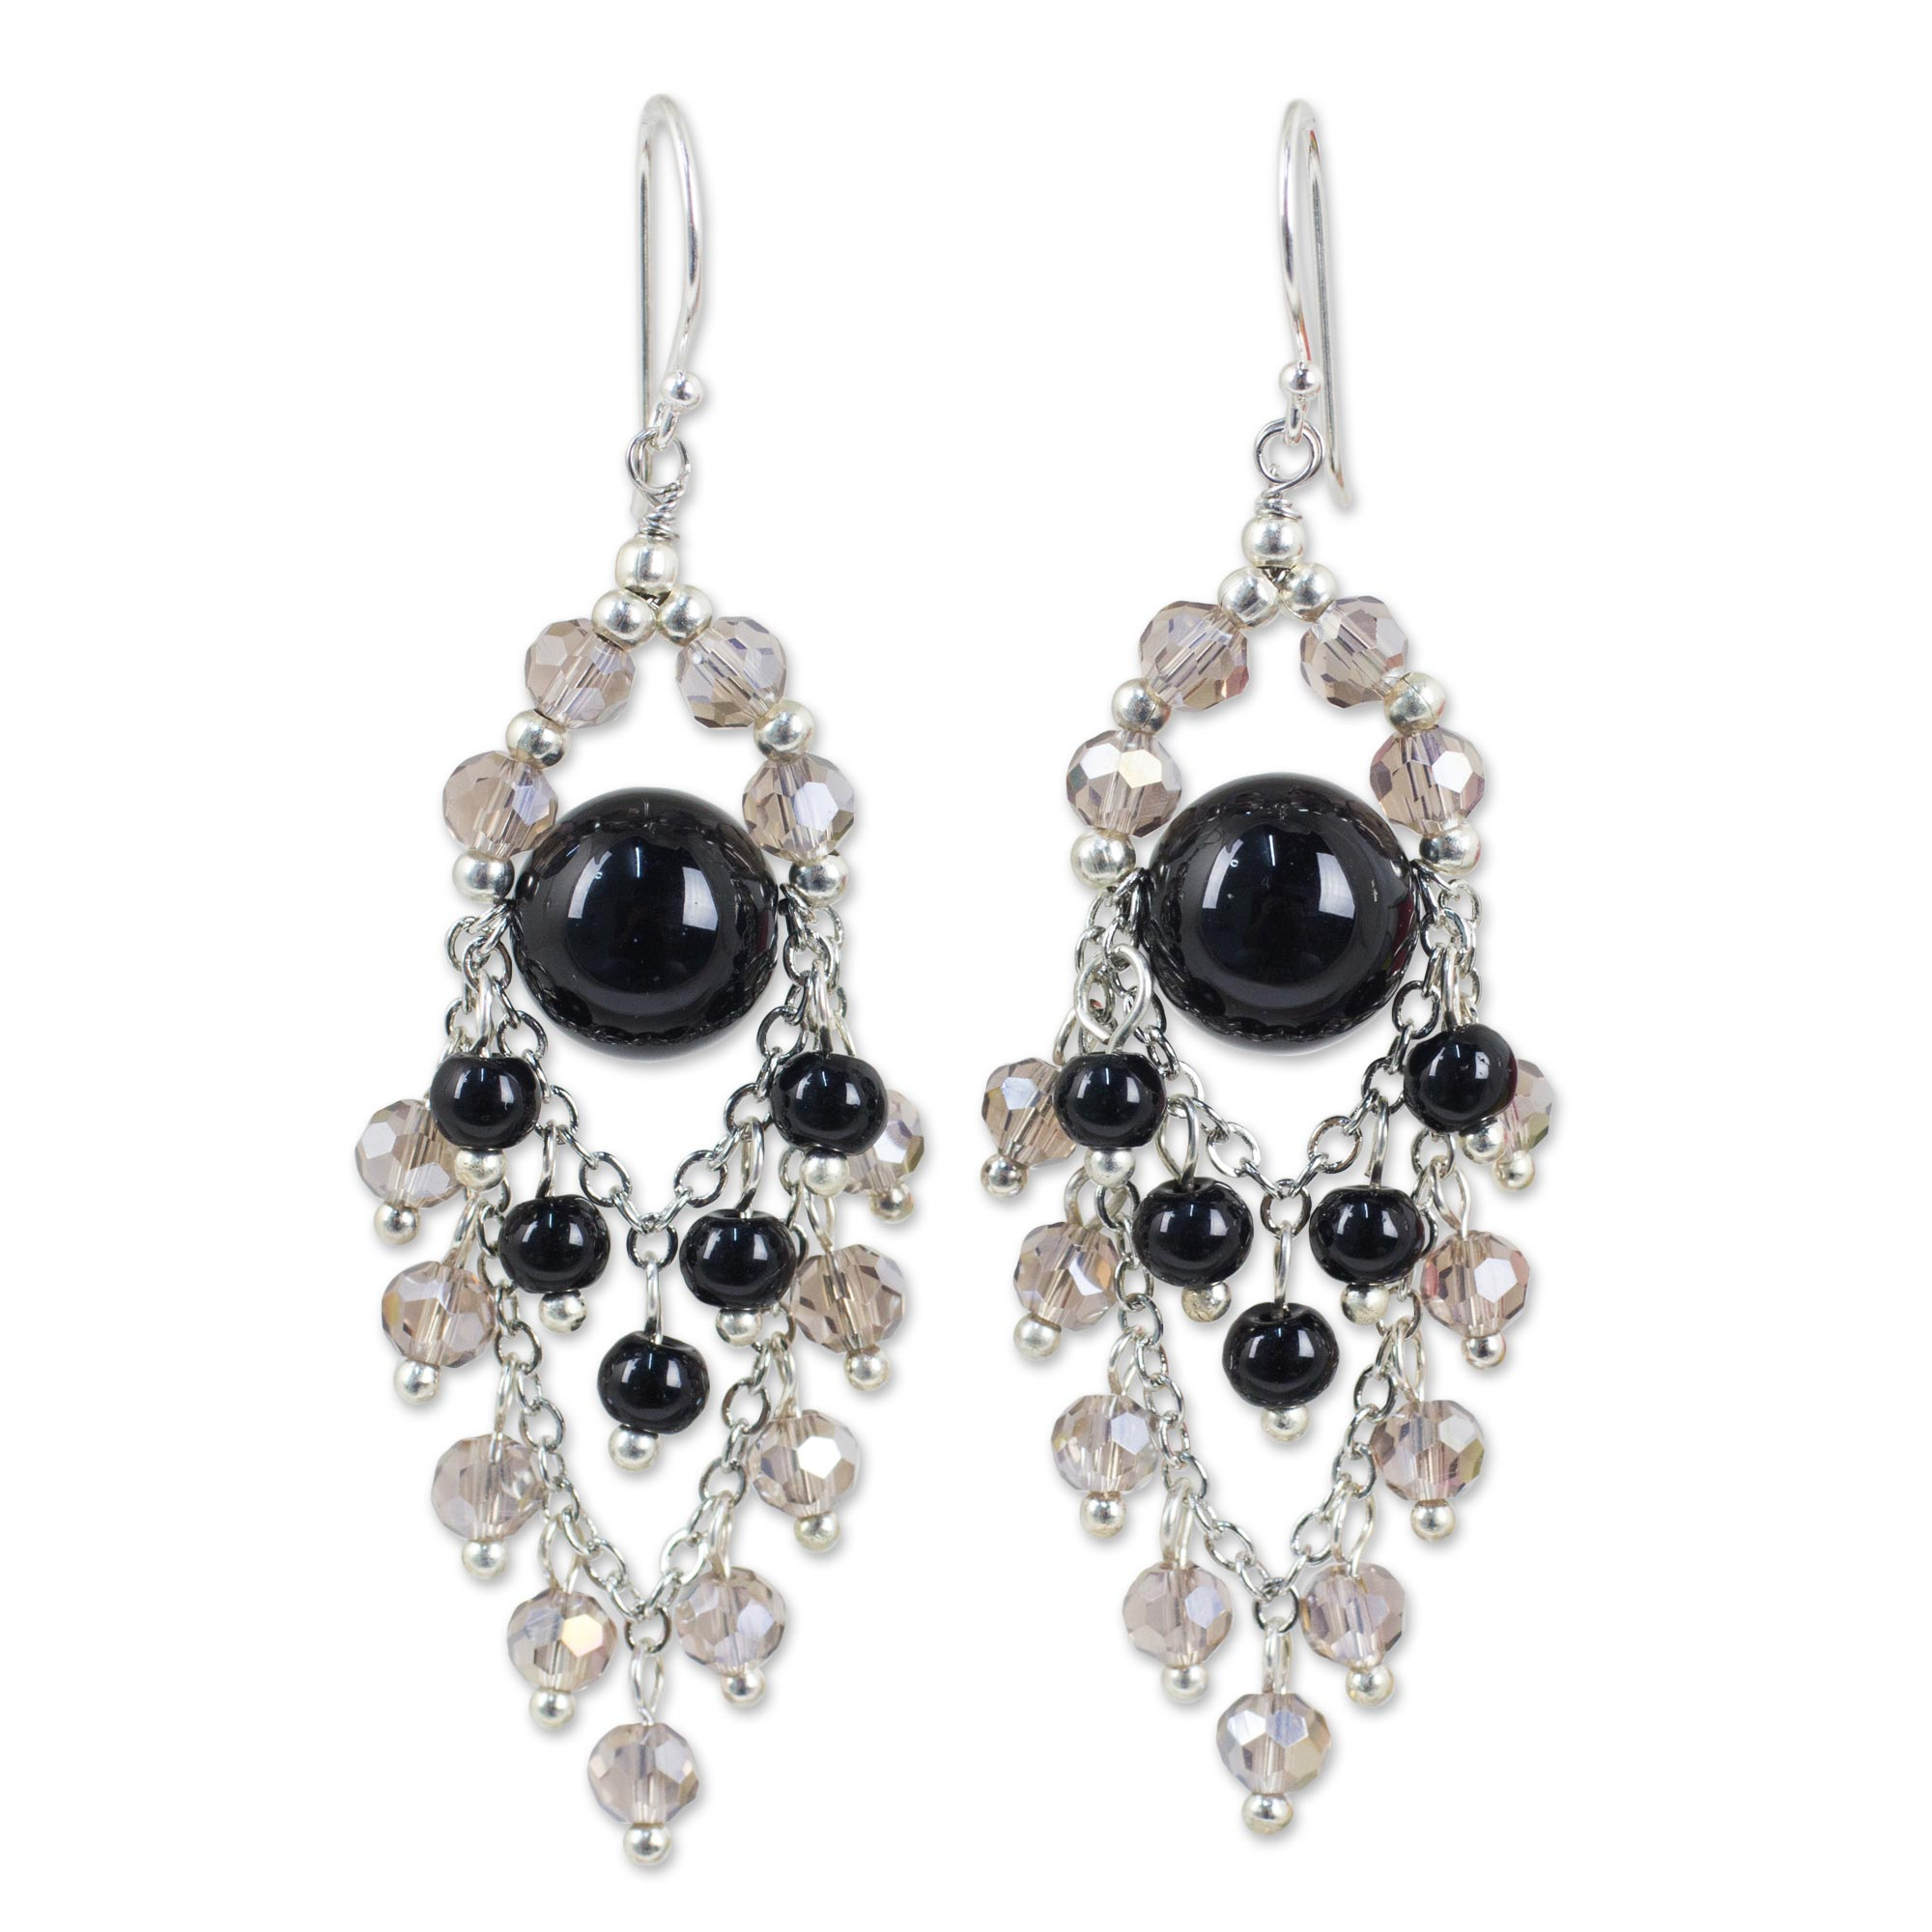 Chandelier Style Earrings with Onyx and Glass Beads - Brilliant Meteor ...